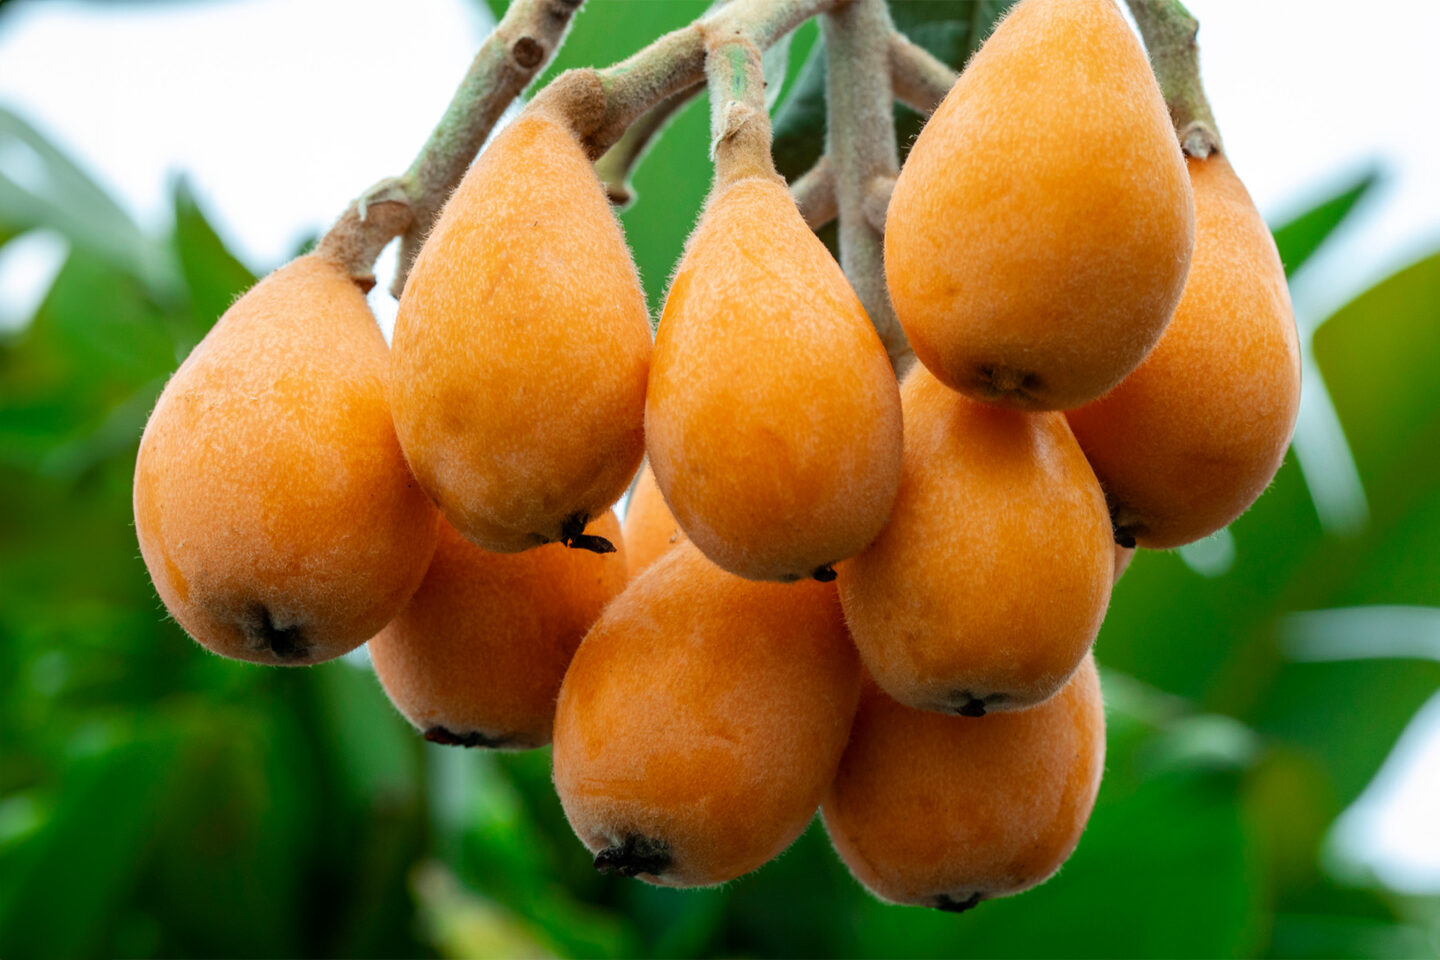 loquat fruits hanging from a tree